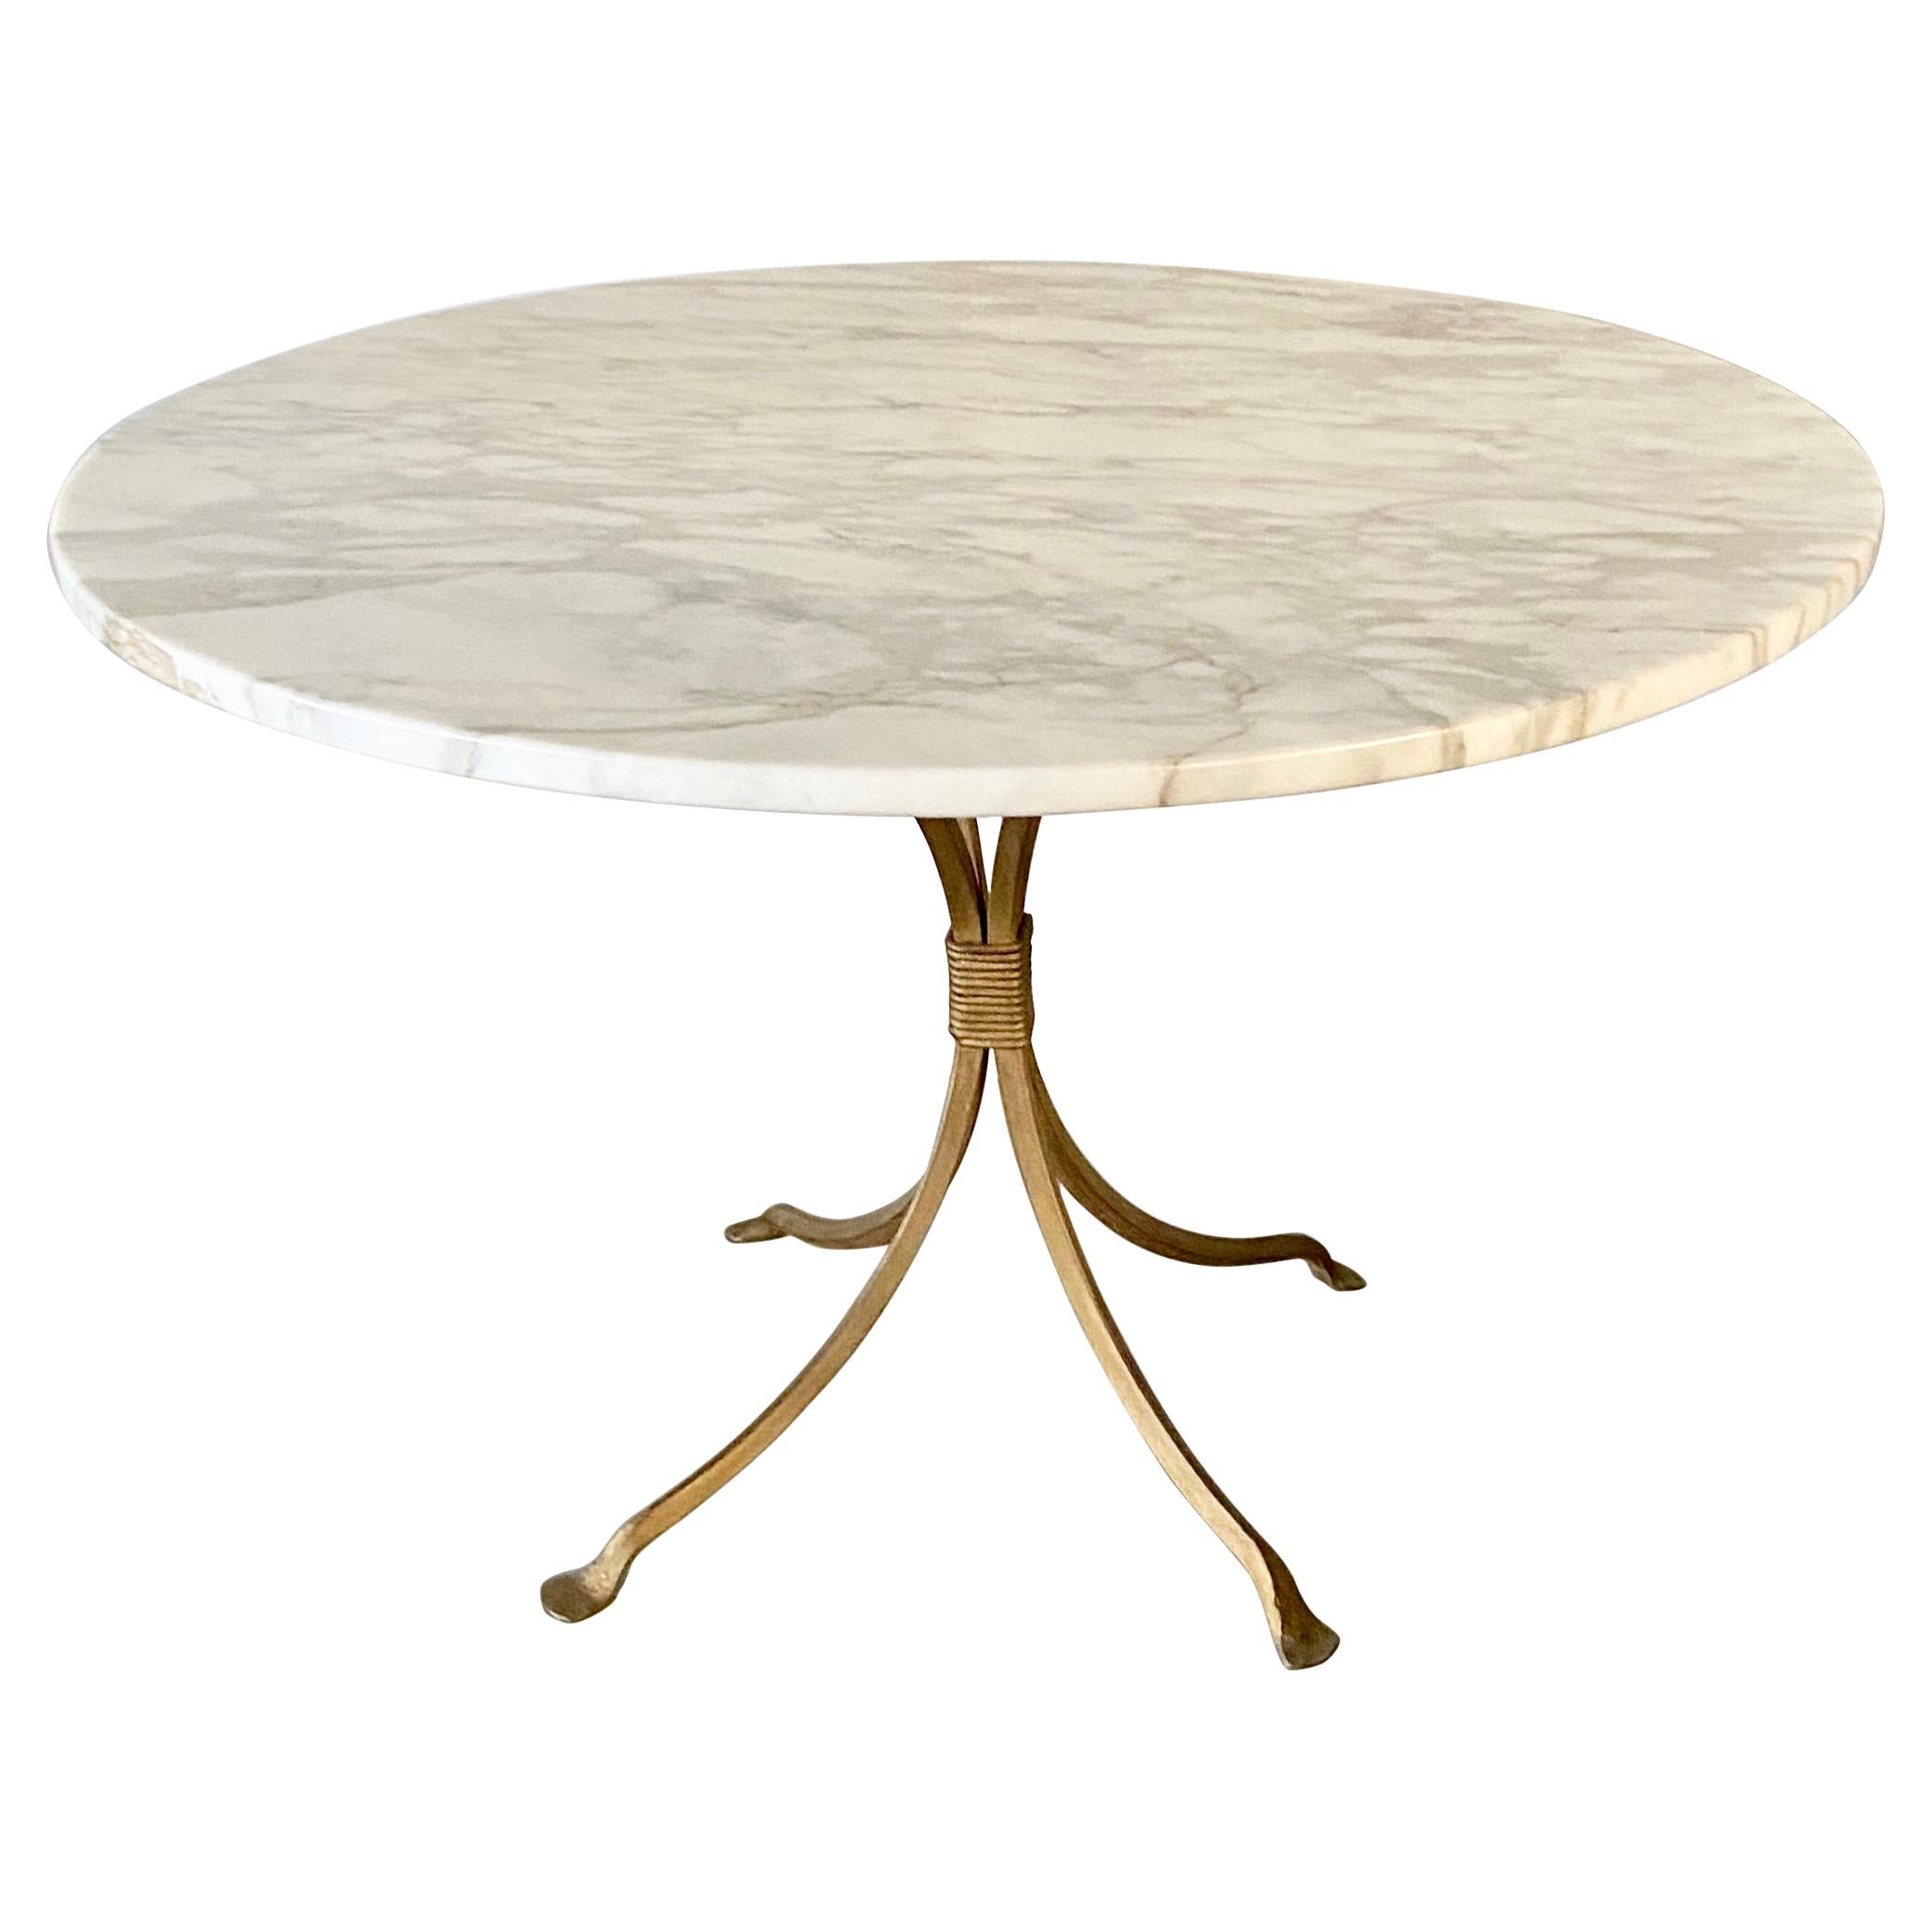 Gold Gilt Metal Garden Table Base with Round Marble Top